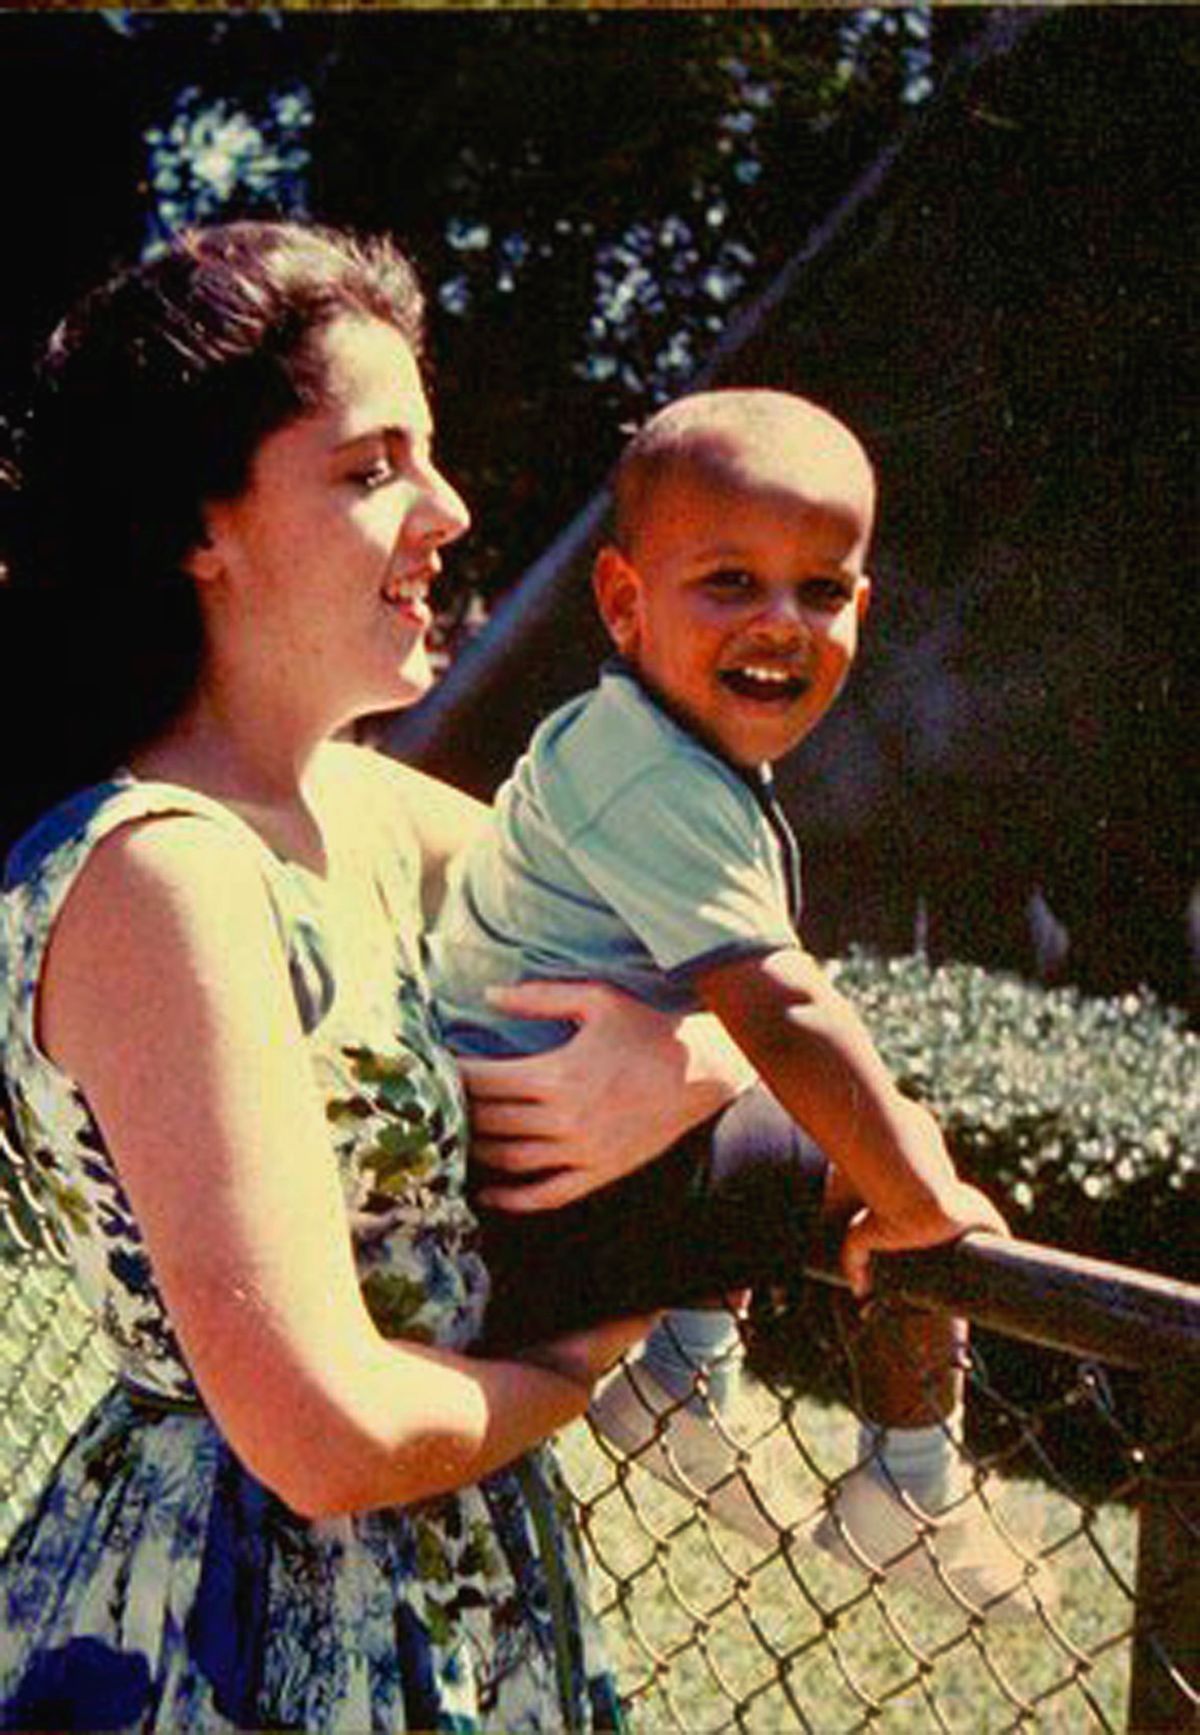 US Democratic presidential candidate Senator Barack Obama (D-IL) is seen as a child with his mother Ann Dunham in an undated family snapshot from the 1960's released by his presidential campaign, February 4, 2008. Obama, now a 46-year-old first-term U.S. senator from Illinois who would be the first black US president, heads into Super Tuesday's slate of 22 Democratic state primaries and caucuses in a tight race with Hillary Clinton to become the party's presidential nominee. REUTERS/Obama For America/Handout     (UNITED STATES) US PRESIDENTIAL ELECTION CAMPAIGN 2008 (USA).  EDITORIAL USE ONLY. NOT FOR SALE FOR MARKETING OR ADVERTISING CAMPAIGNS. (Reuters)